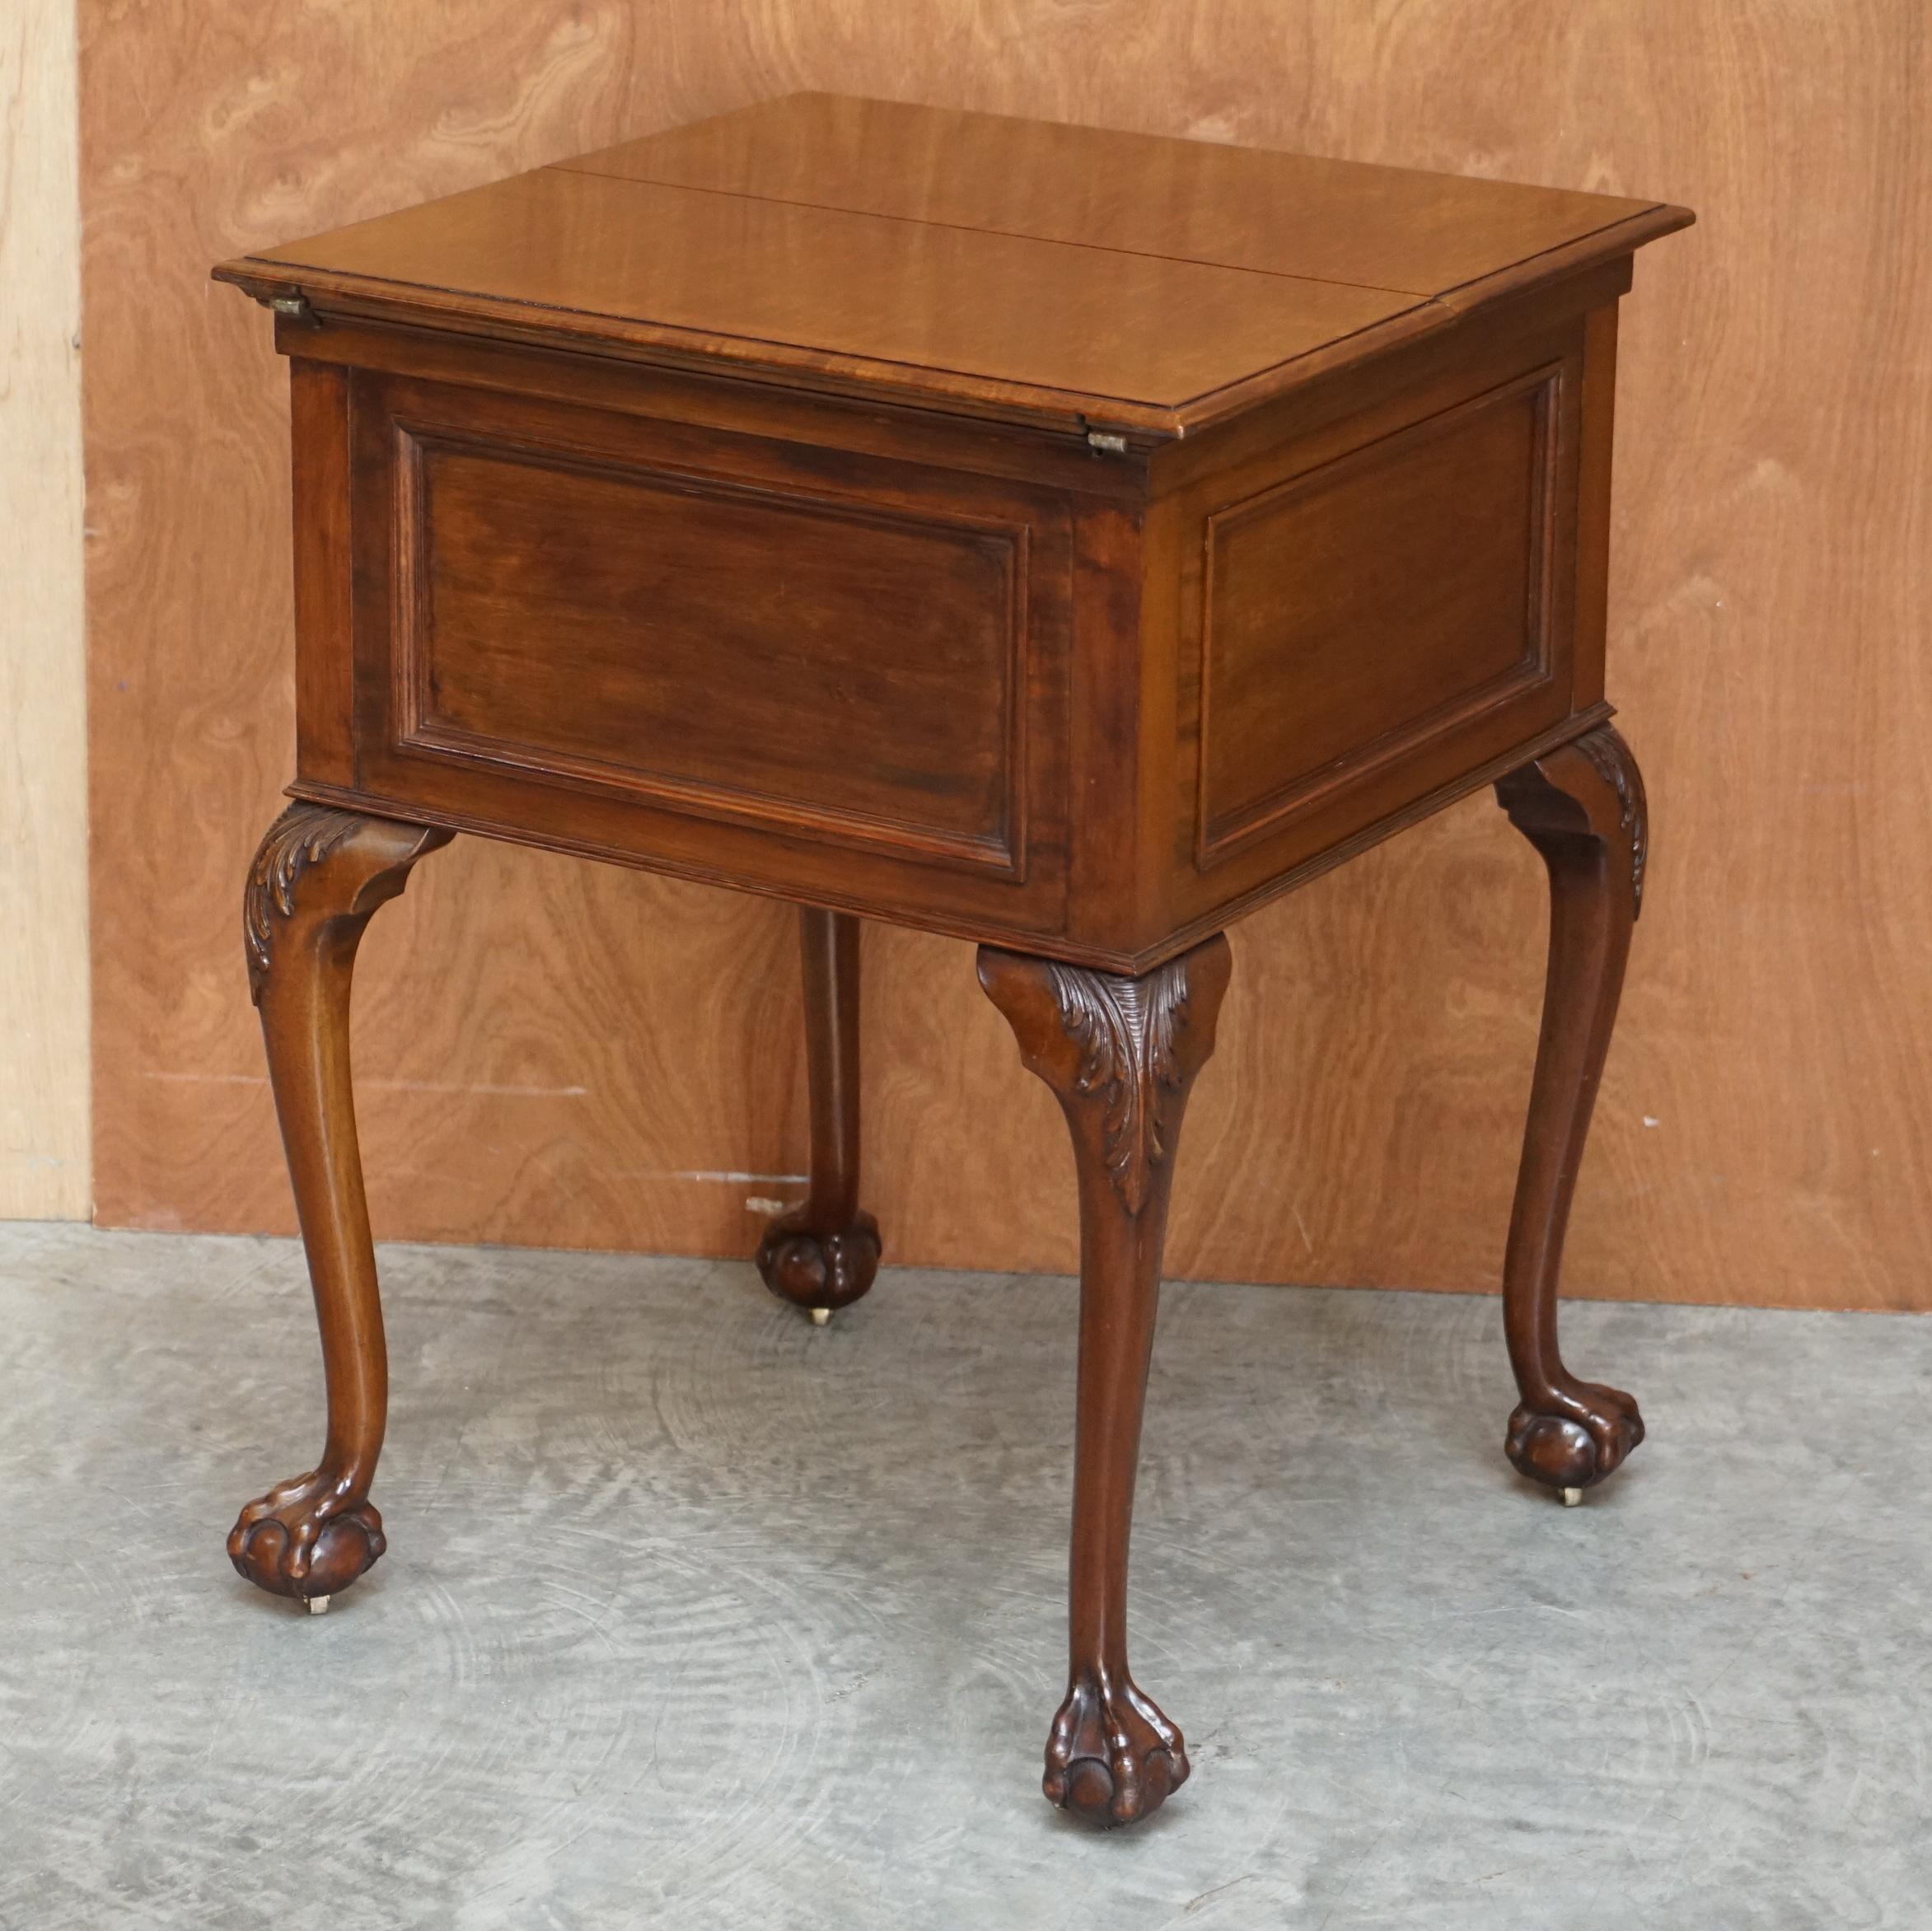 We are delighted to offer for sale this wonderful Victorian mahogany Asprey london, mahogany Elevette drinks table

What a table! This really makes serving drinks a sense of occasion when it comes out of this magnificent work of art. Retailed by